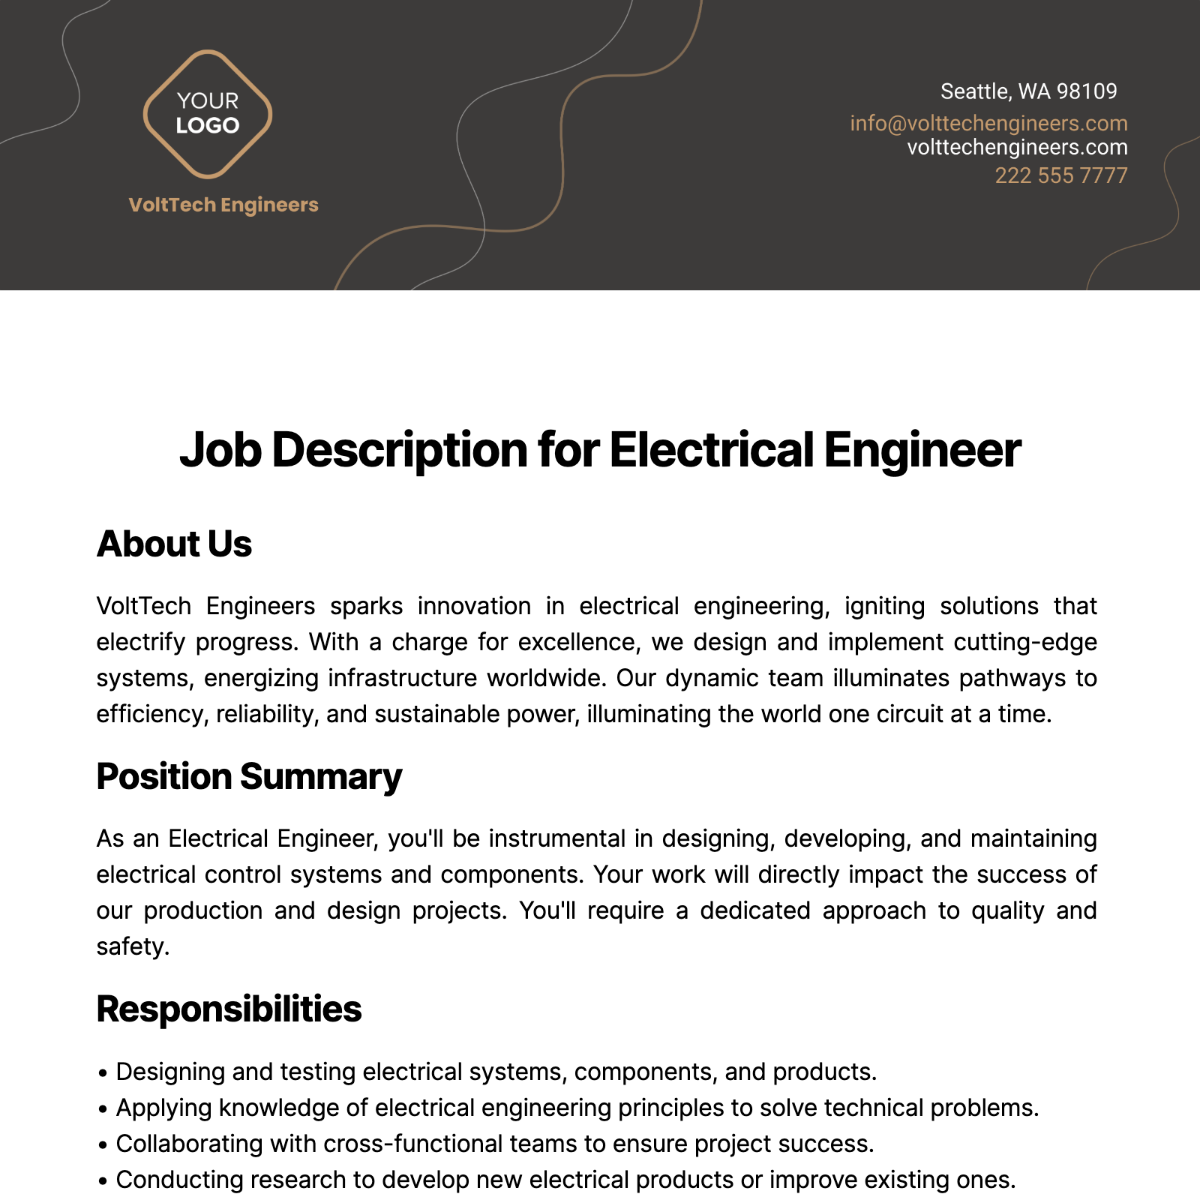 Job Description for Electrical Engineer Template